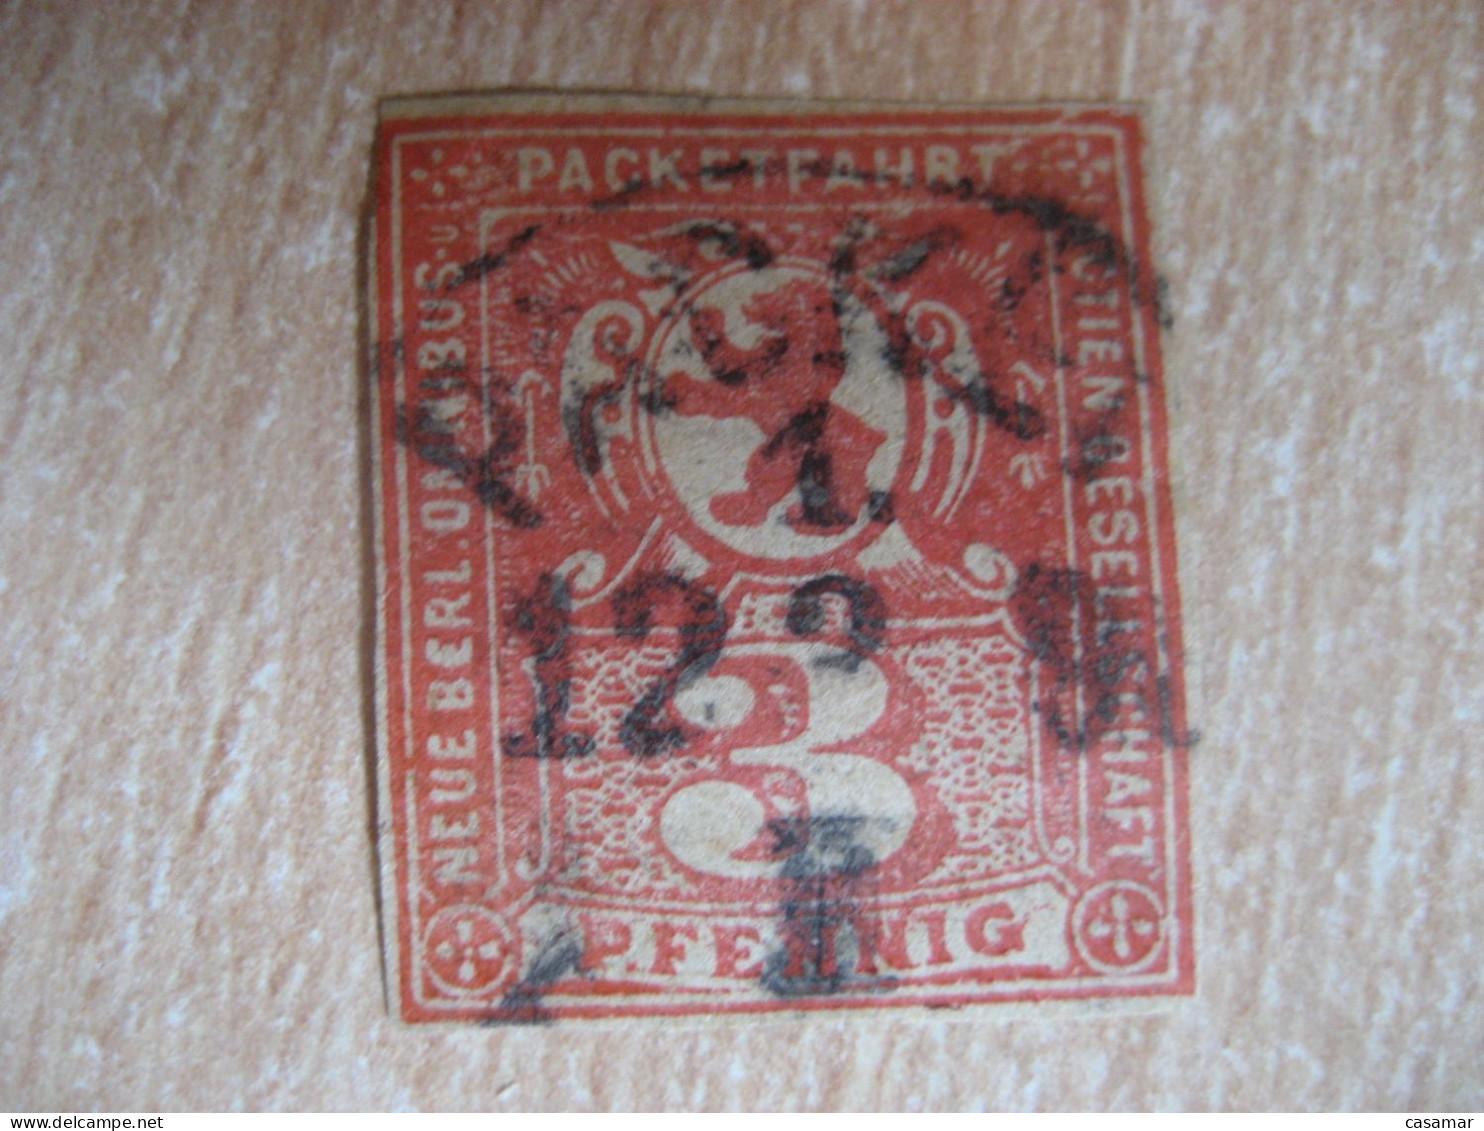 BERLIN Packetfahrt Neu Berl. Omnibus 3 Pf Red Imperforated Michel ??? Privat Private Local Stamp GERMANY Slight Faults - Private & Lokale Post